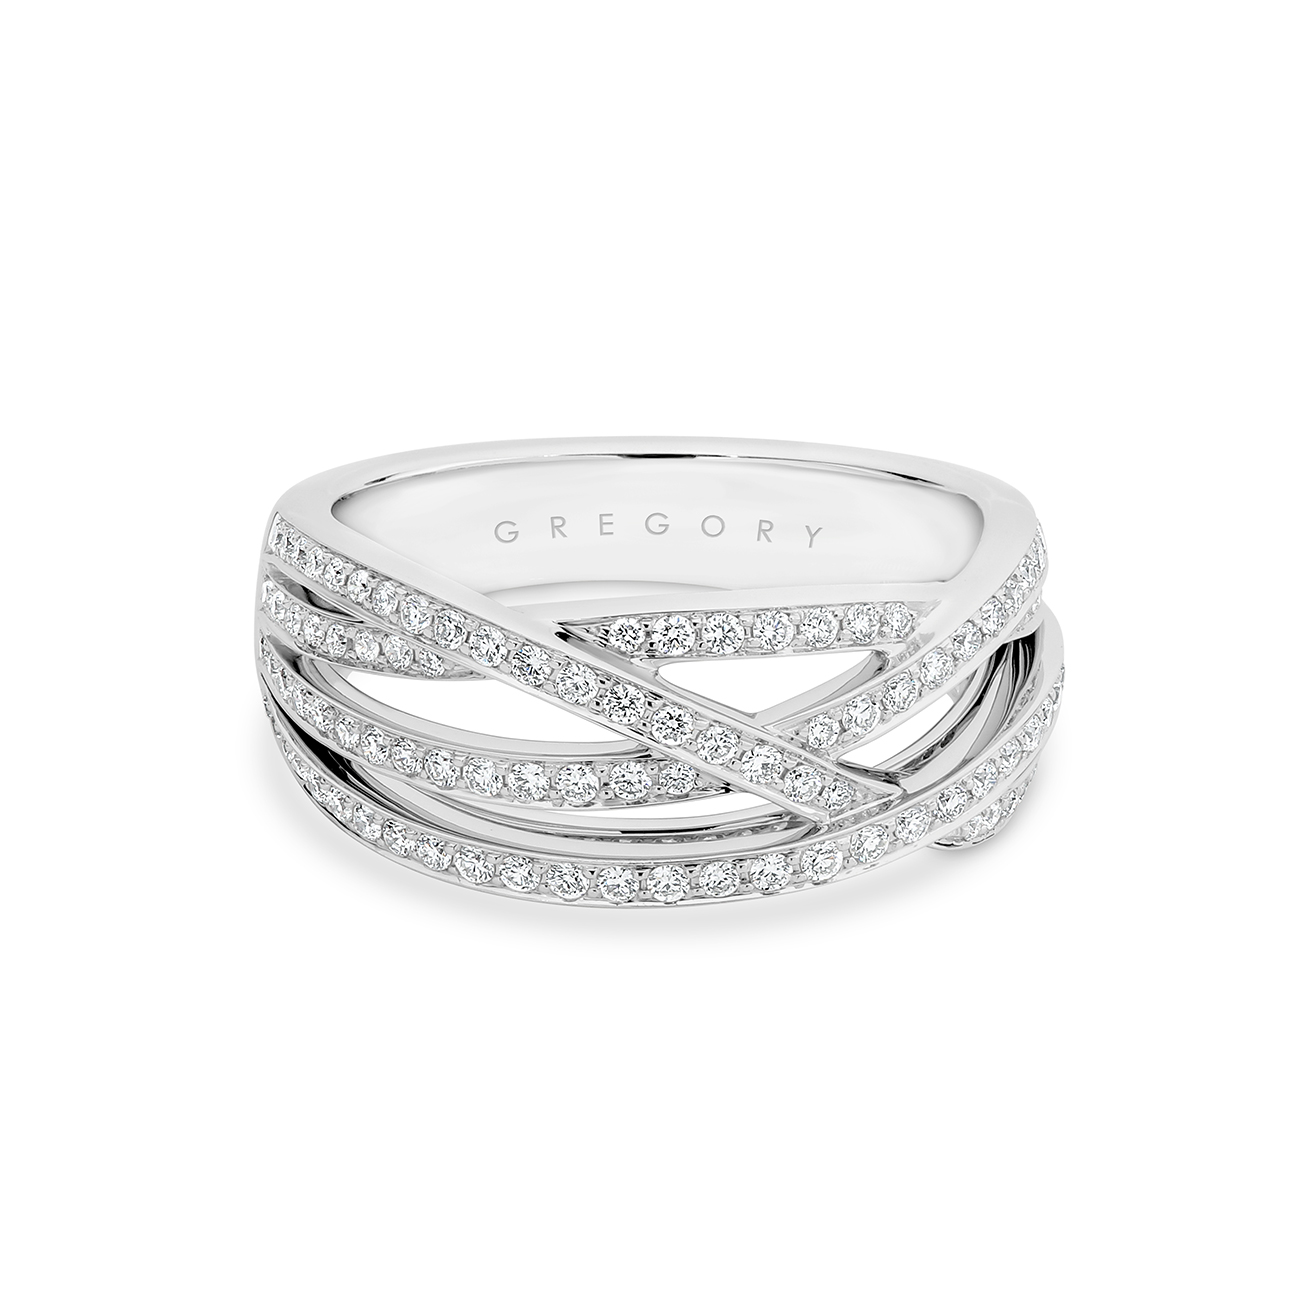 Fancy Crossover Diamond Dress Ring in White Gold